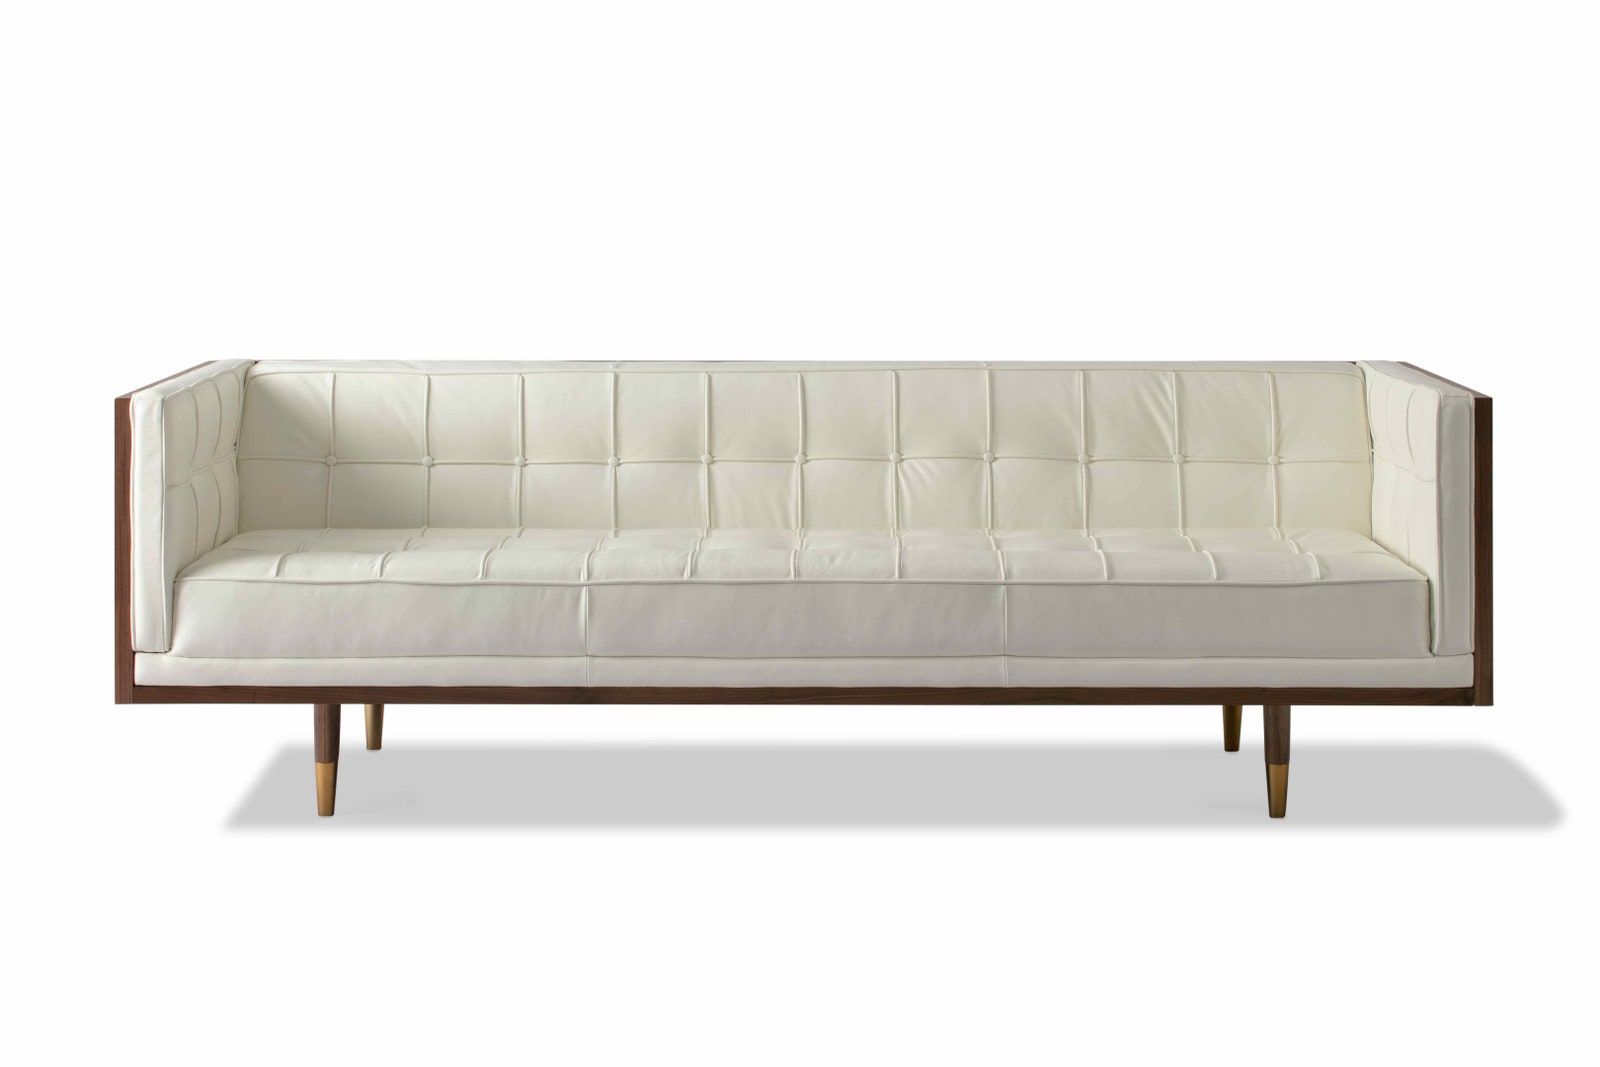 5 Mid Century Modern Sofas To Breathe Life Into Your Living Space |  Architectural Digest Throughout Mid Century Modern Sofas (Photo 6 of 15)